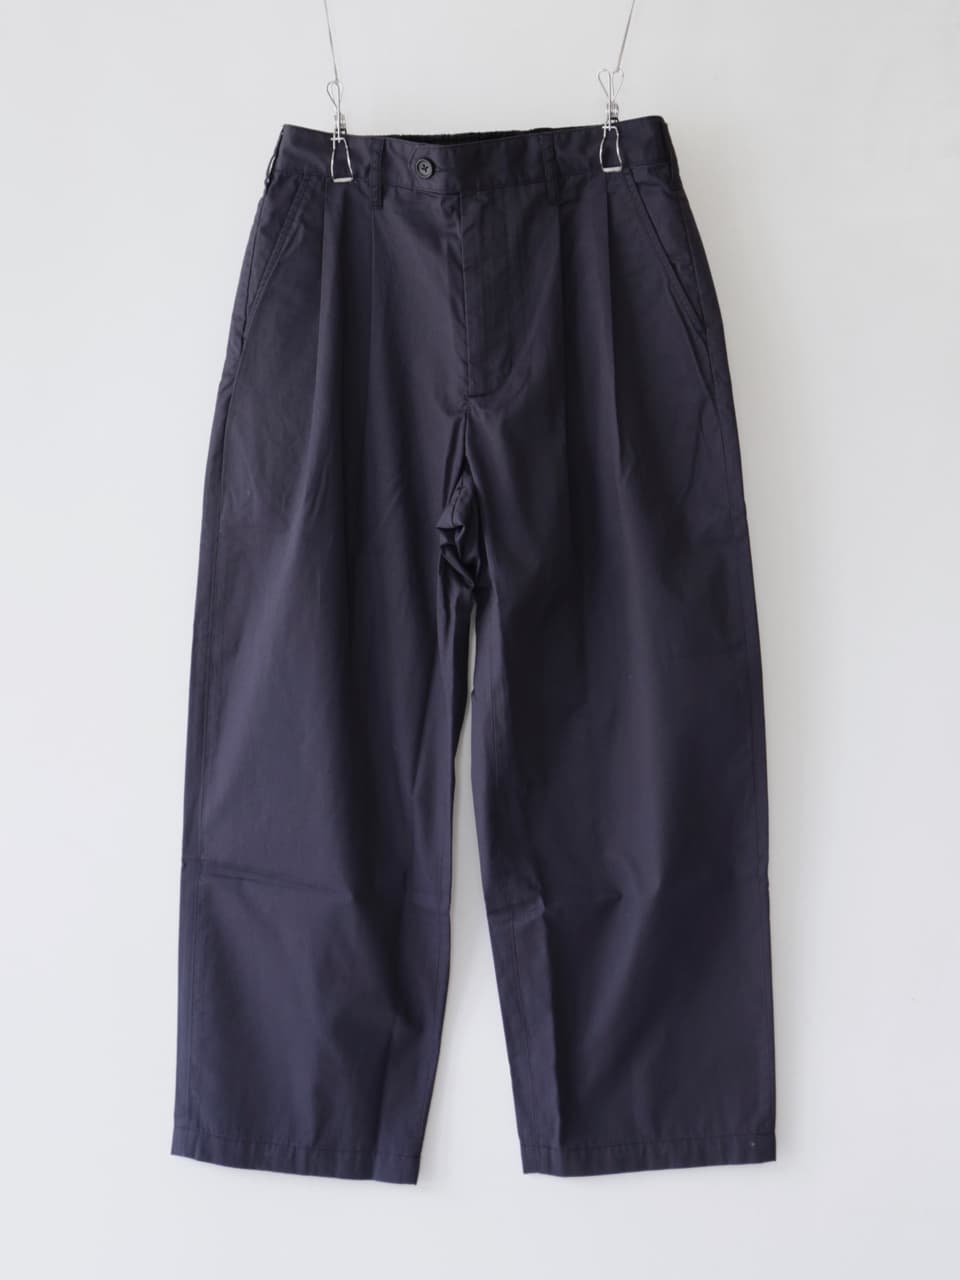 Engineered Garments Emerson Pant - High Count Twill|セレクト 